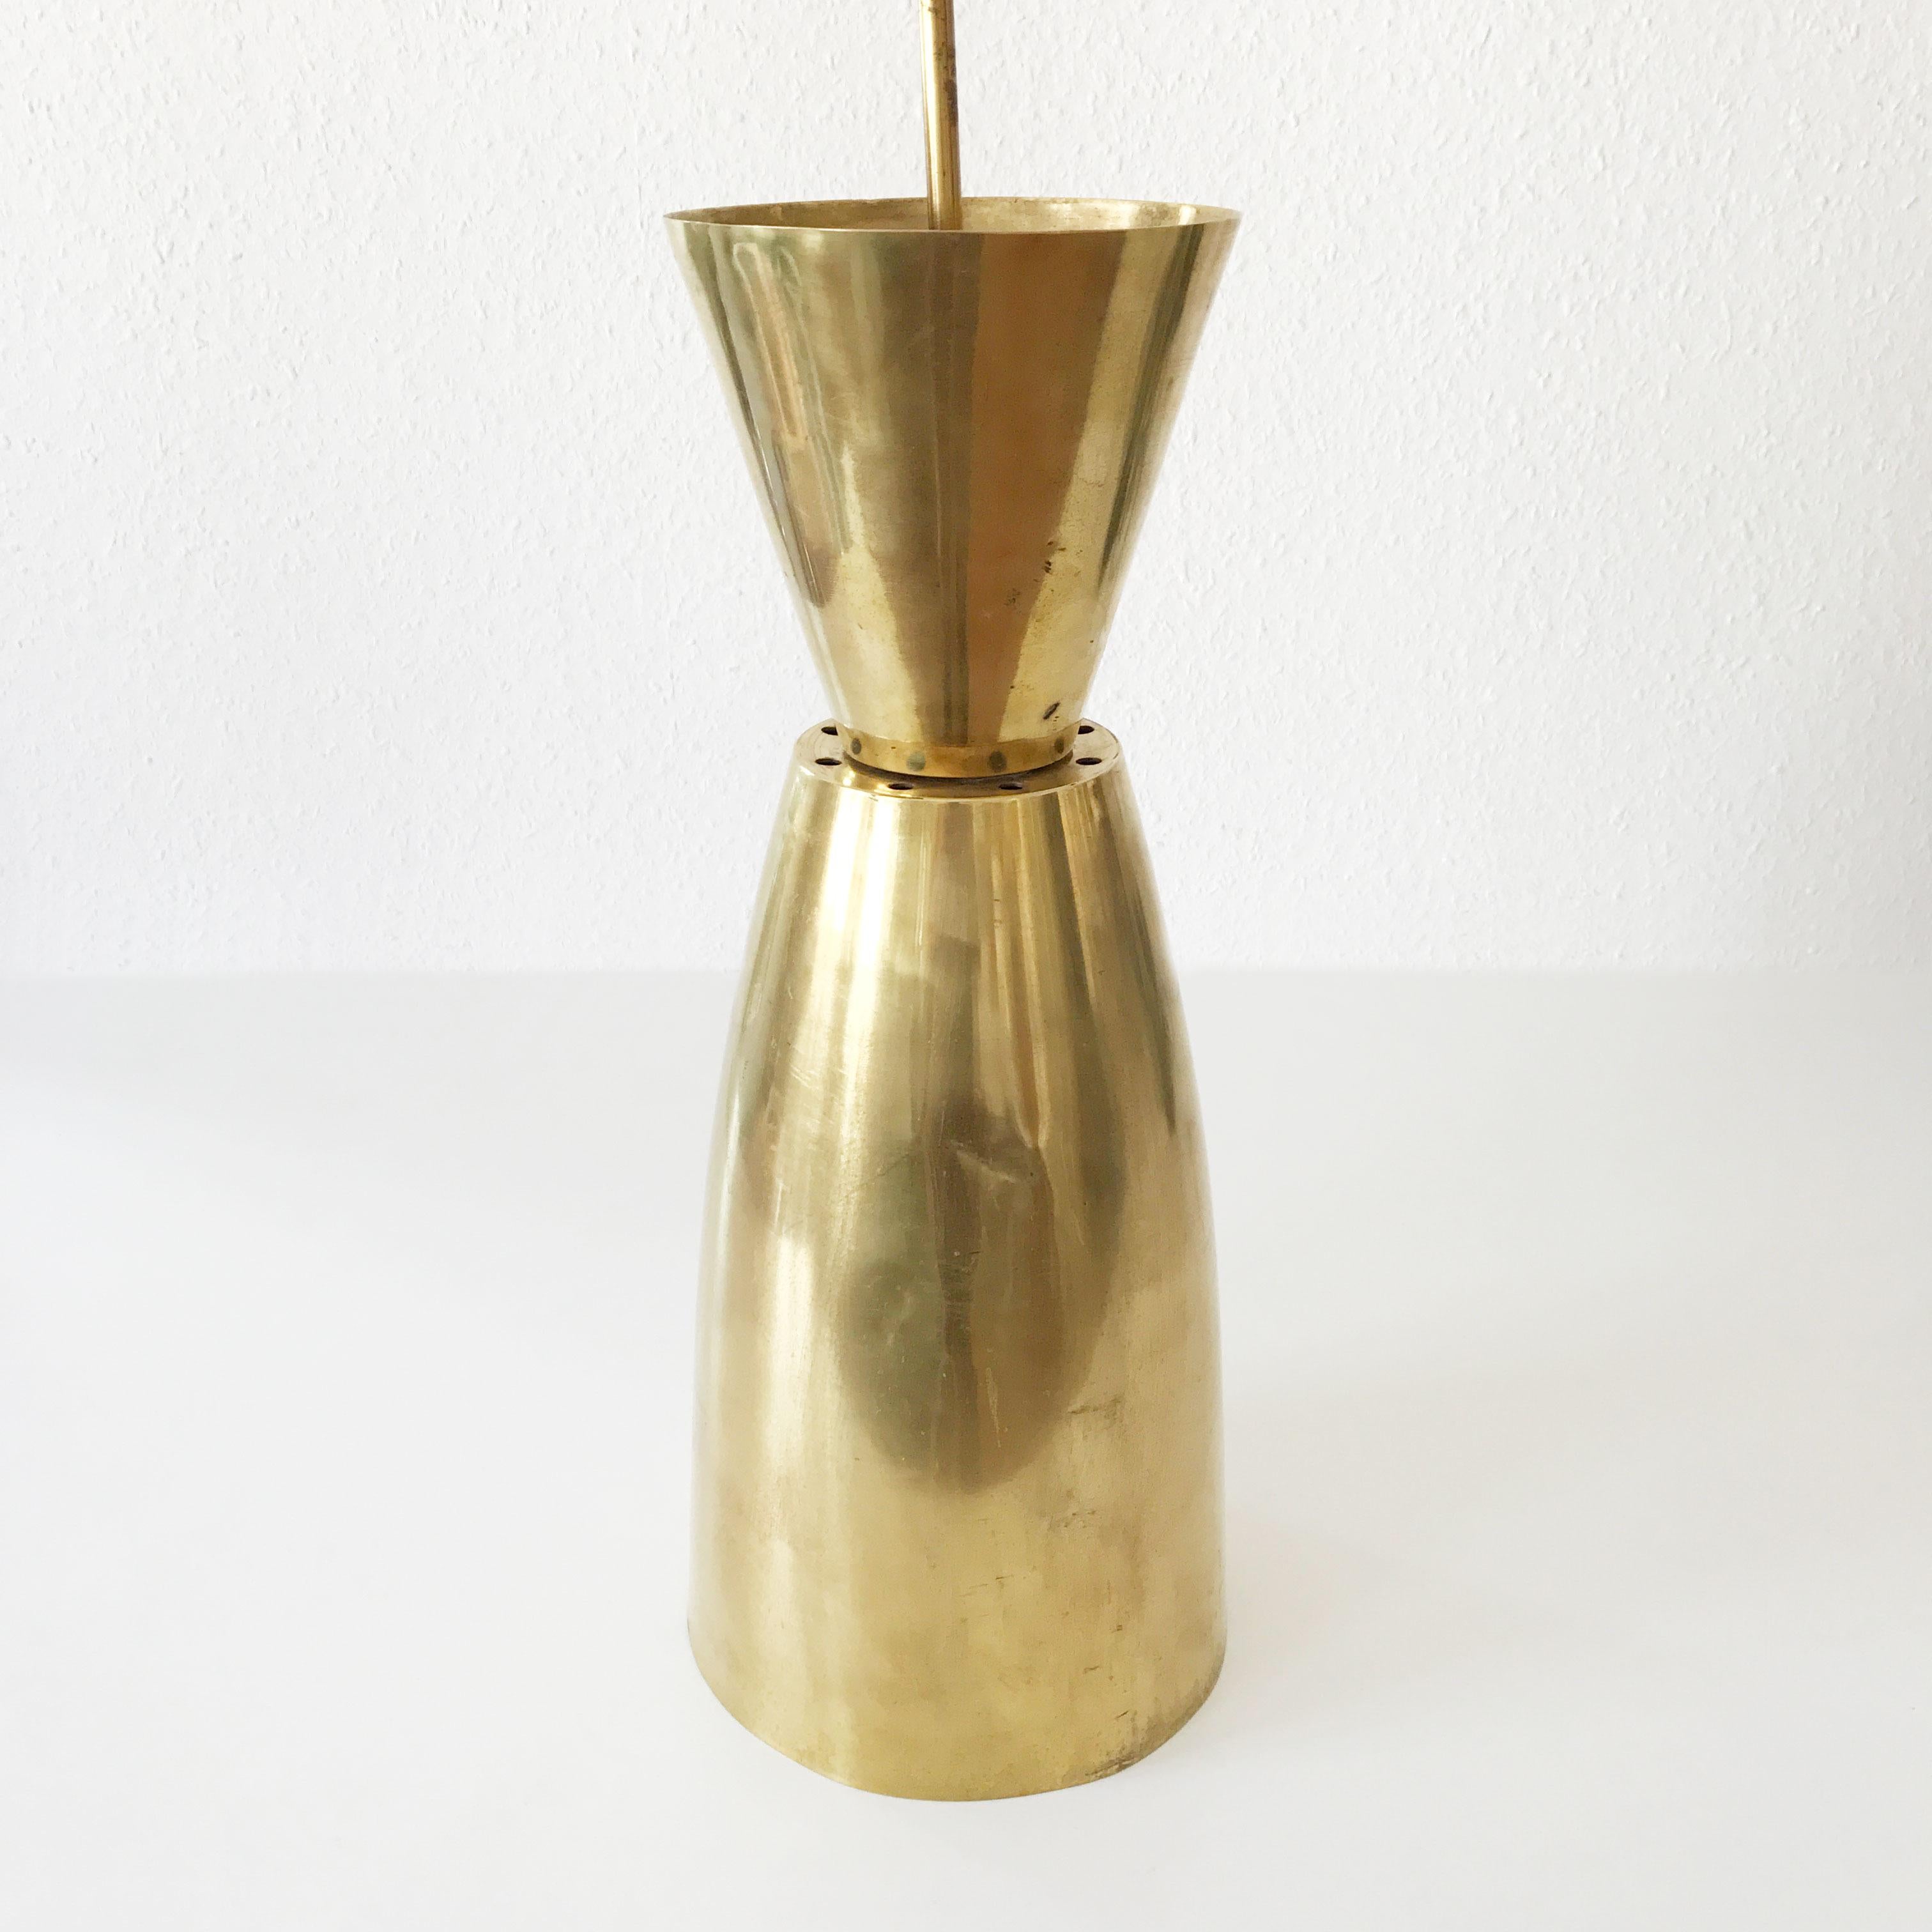 Large Mid-Century Modern Diabolo Brass Pendant Lamp, 1950s, Germany For Sale 4